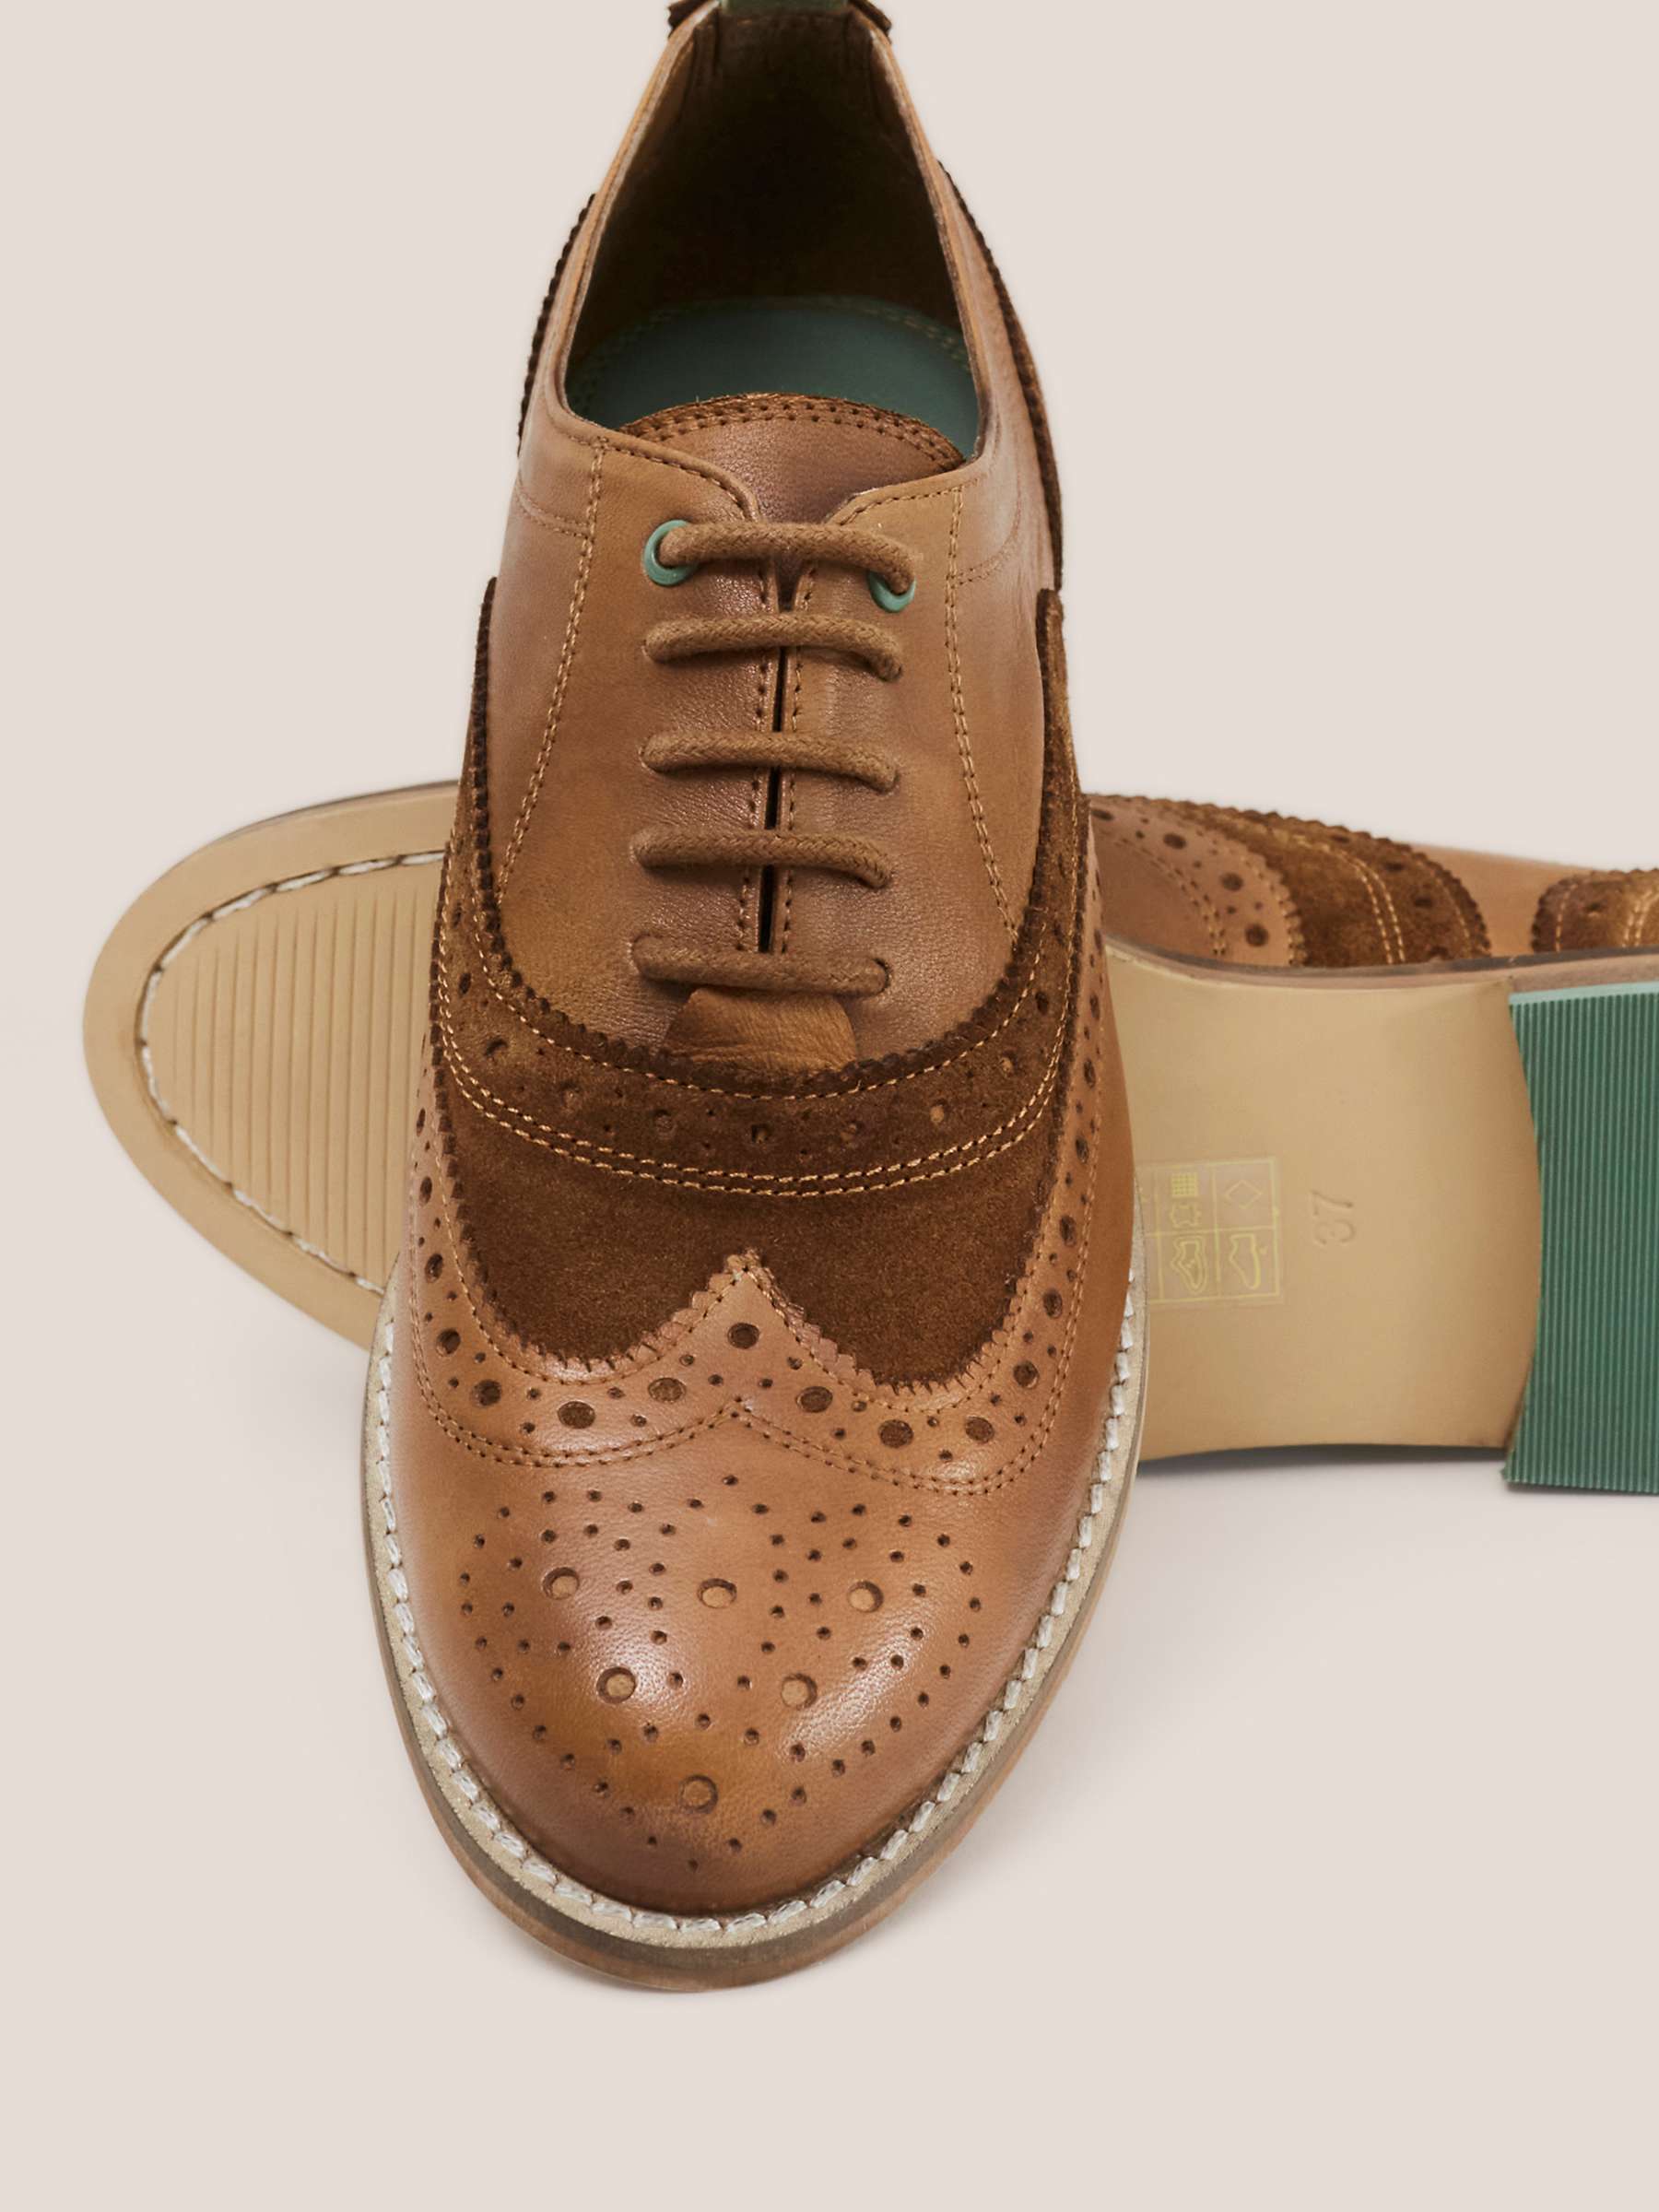 Buy White Stuff Leather Lace Up Brogues, Dark Tan Online at johnlewis.com